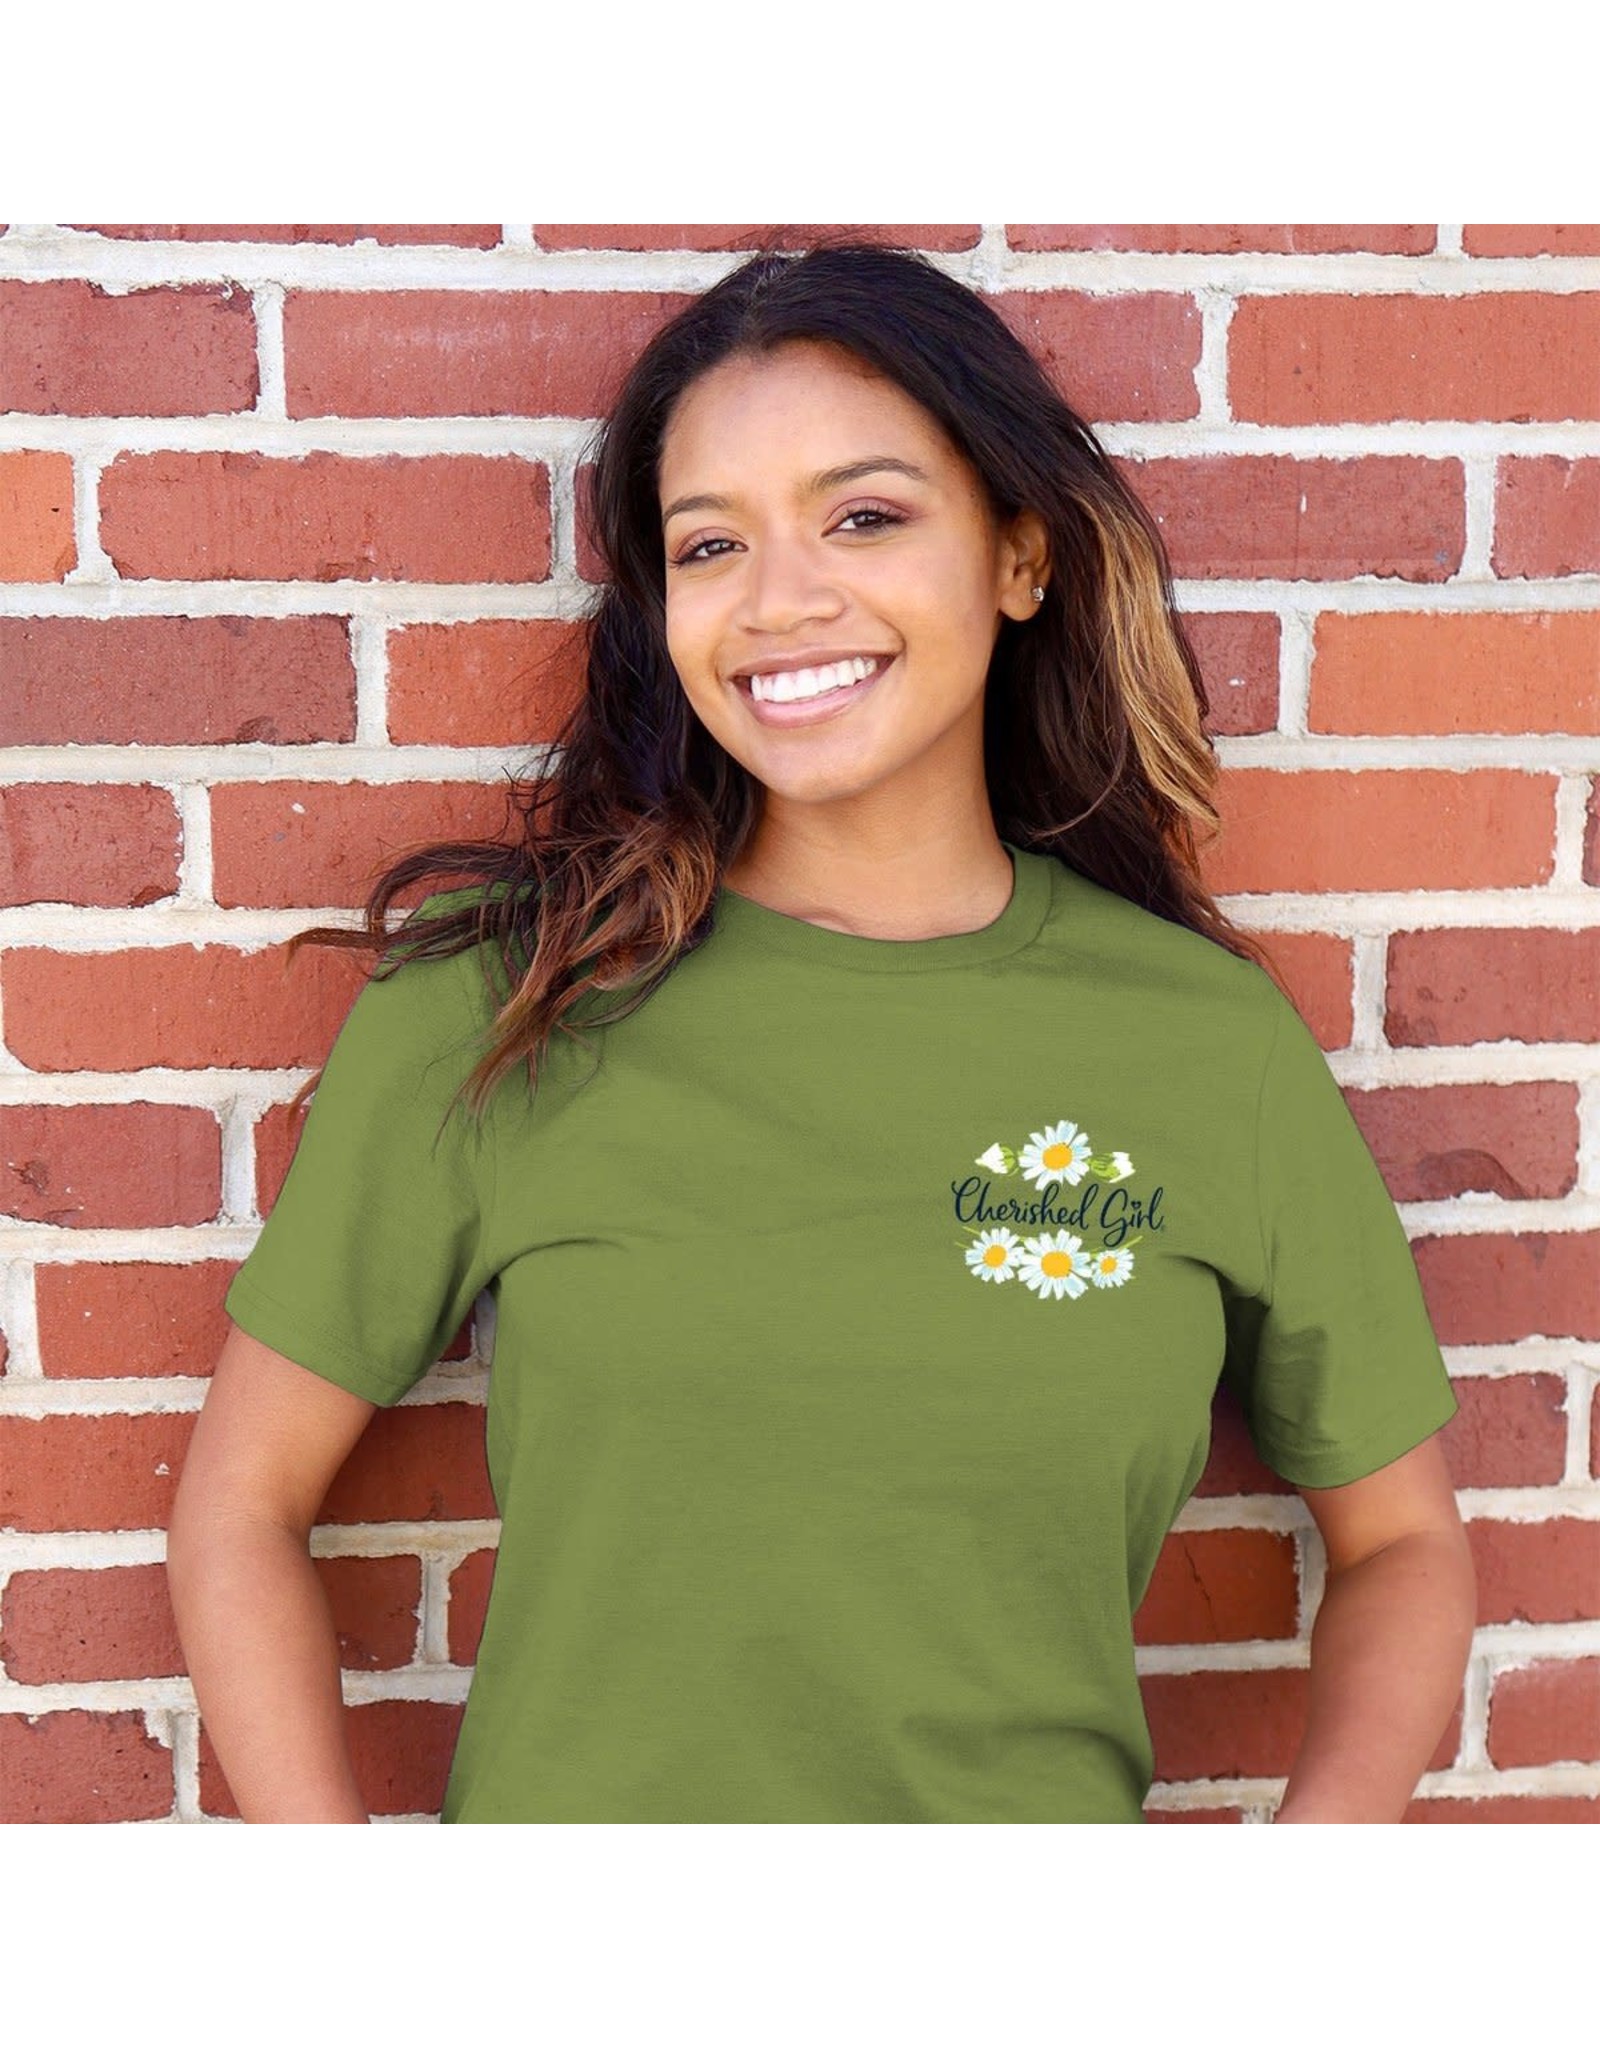 Cherished Girl Adult Shirt - Too Many Blessings